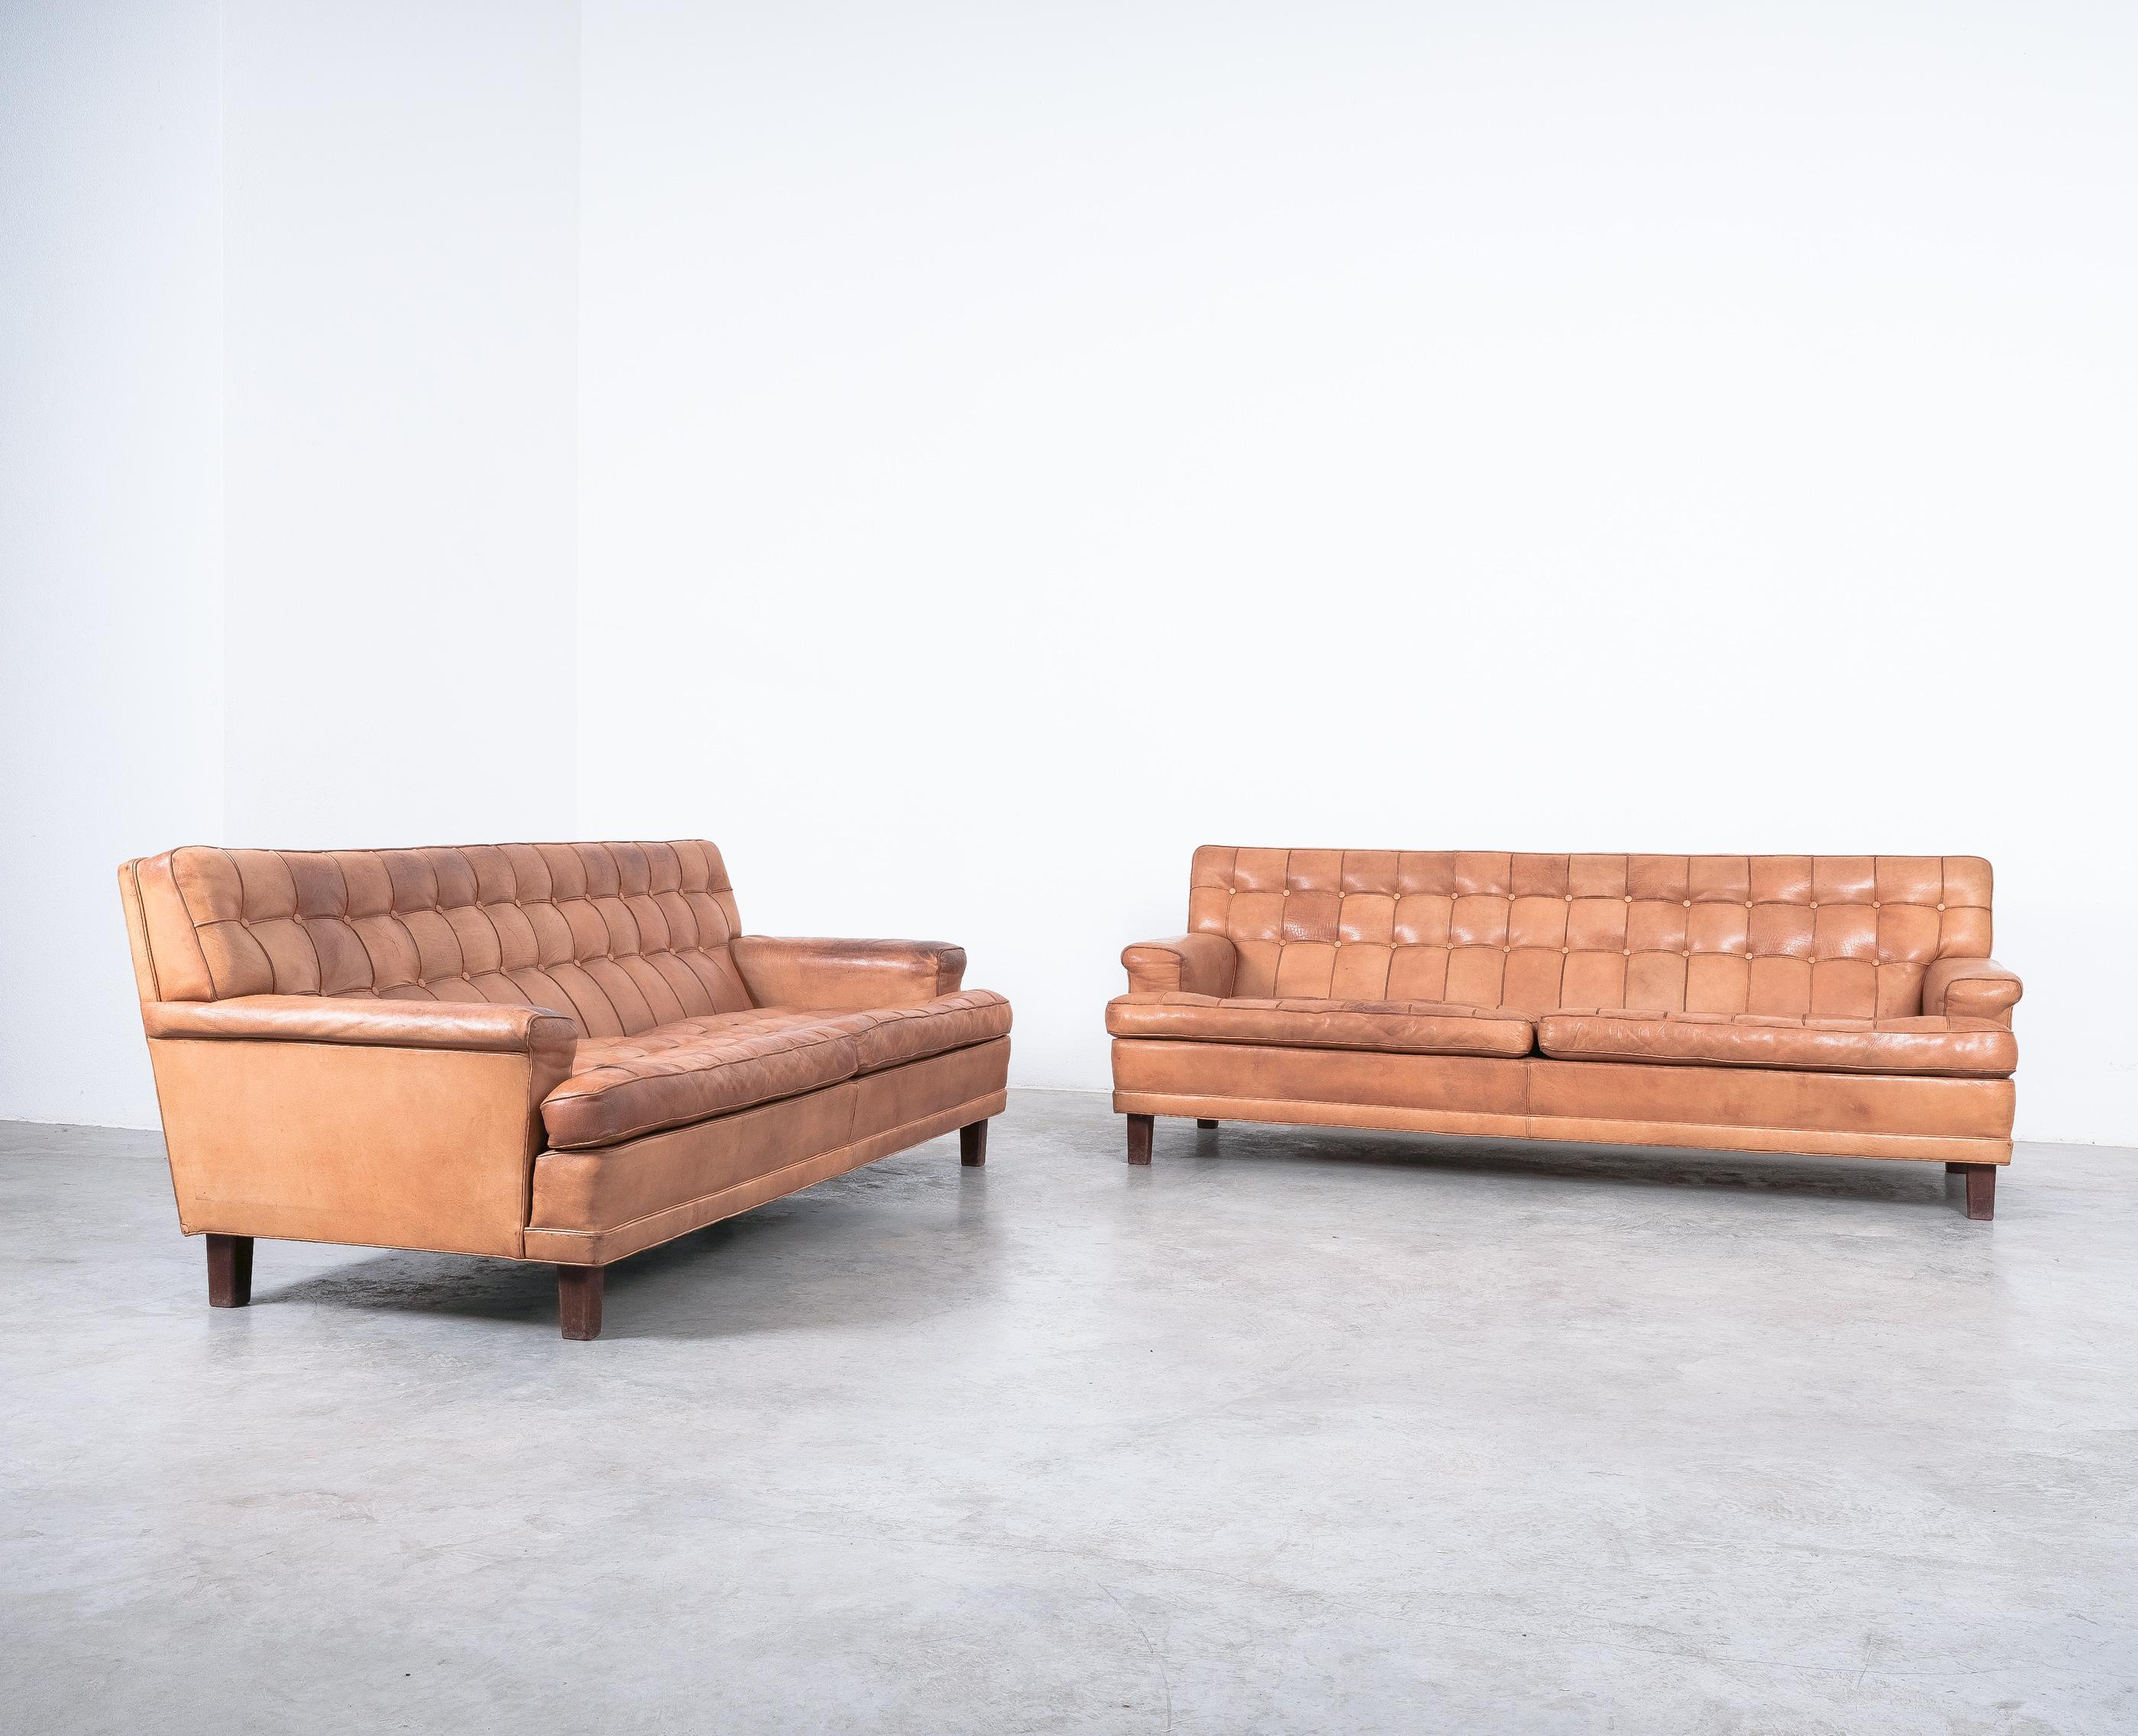 Pair of identical cognac leather large 3-seat sofas by Arne Norell, Sweden 1960

Priced as a pair, please inquire if you wish to pirchase a single piece only.

Great comfort sofas in good condition with a beautiful patina to the original leather.